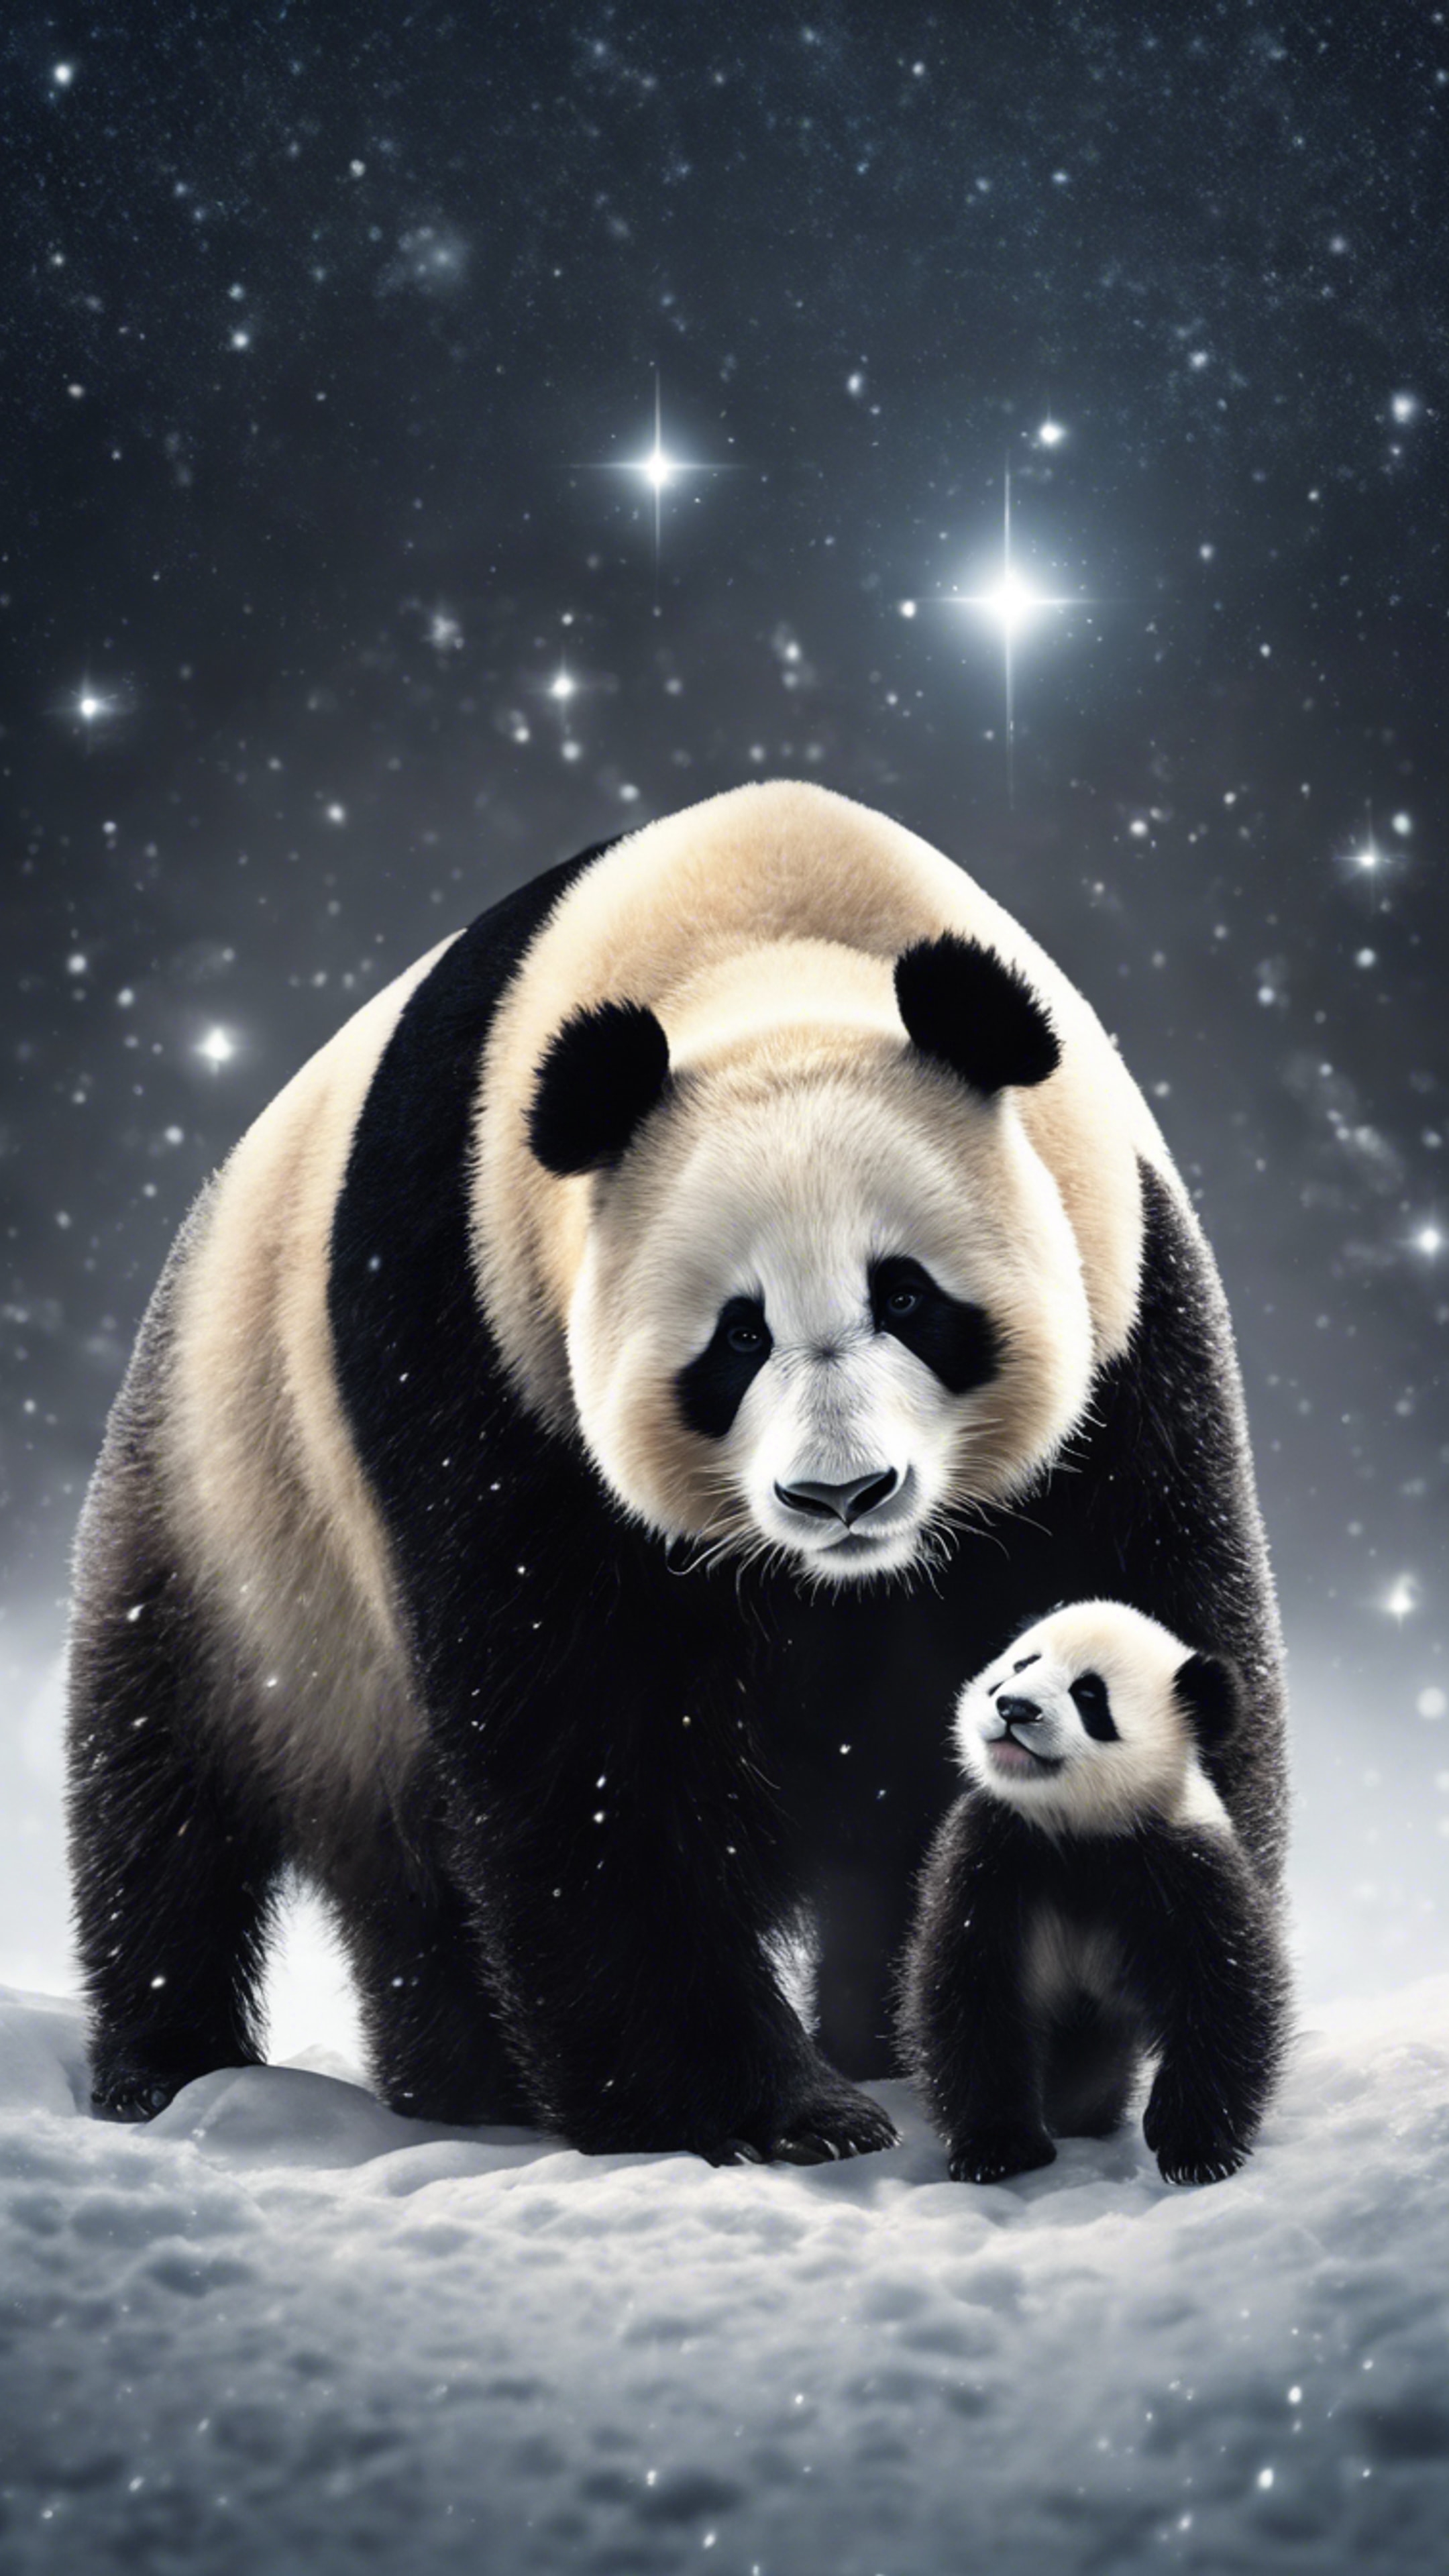 A mother panda with her cubs, peacefully taking a stroll on a silent, snowy night under a blanket of stars. Ταπετσαρία[875b5ef660eb48ddb691]